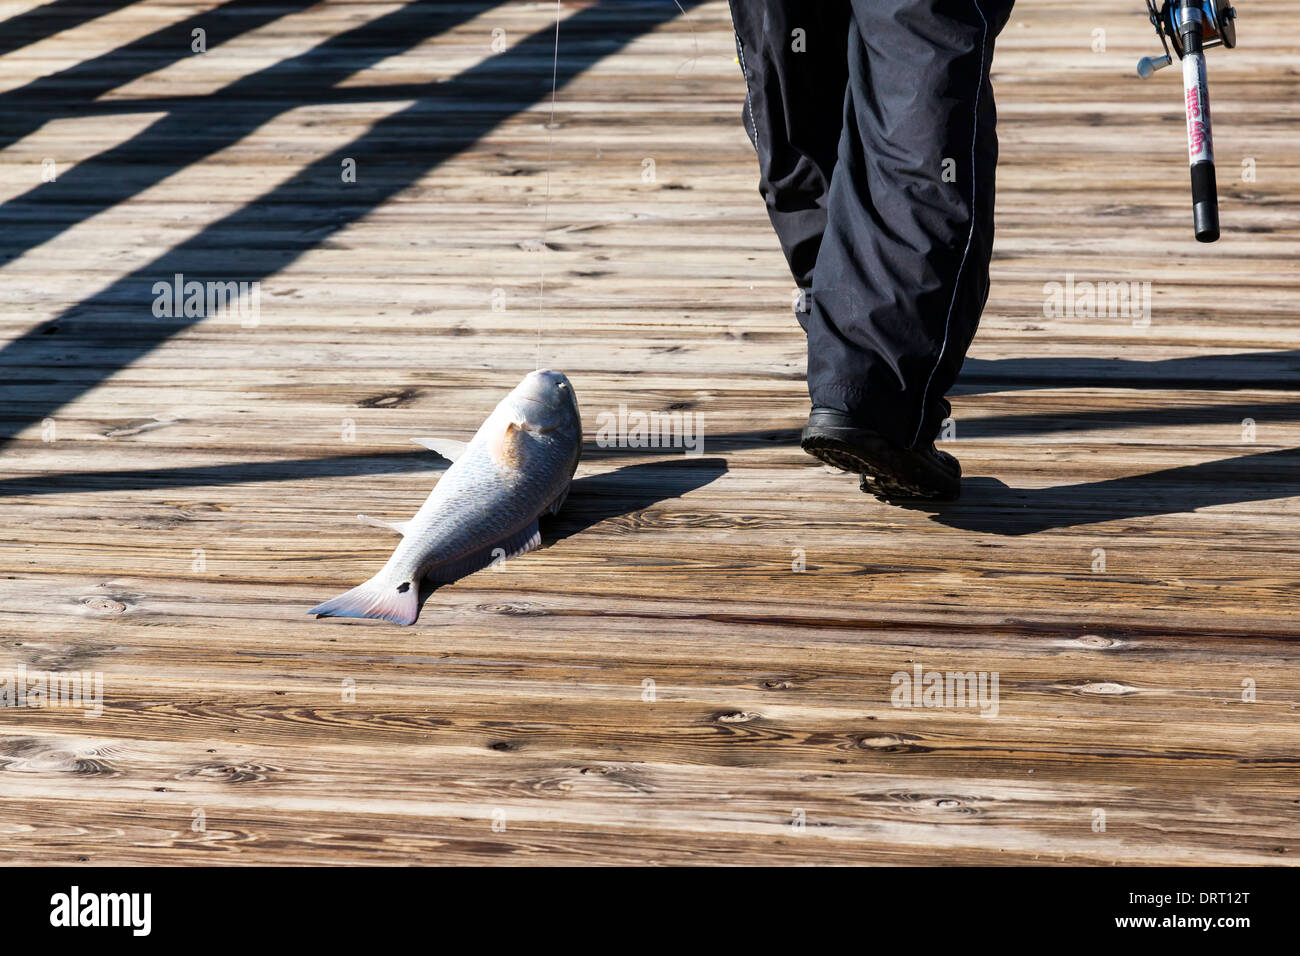 Feet of fisherman carrying Ugly Stik rod and reel and dragging large Redfish by hook and line along fishing pier wooden dock. Stock Photo